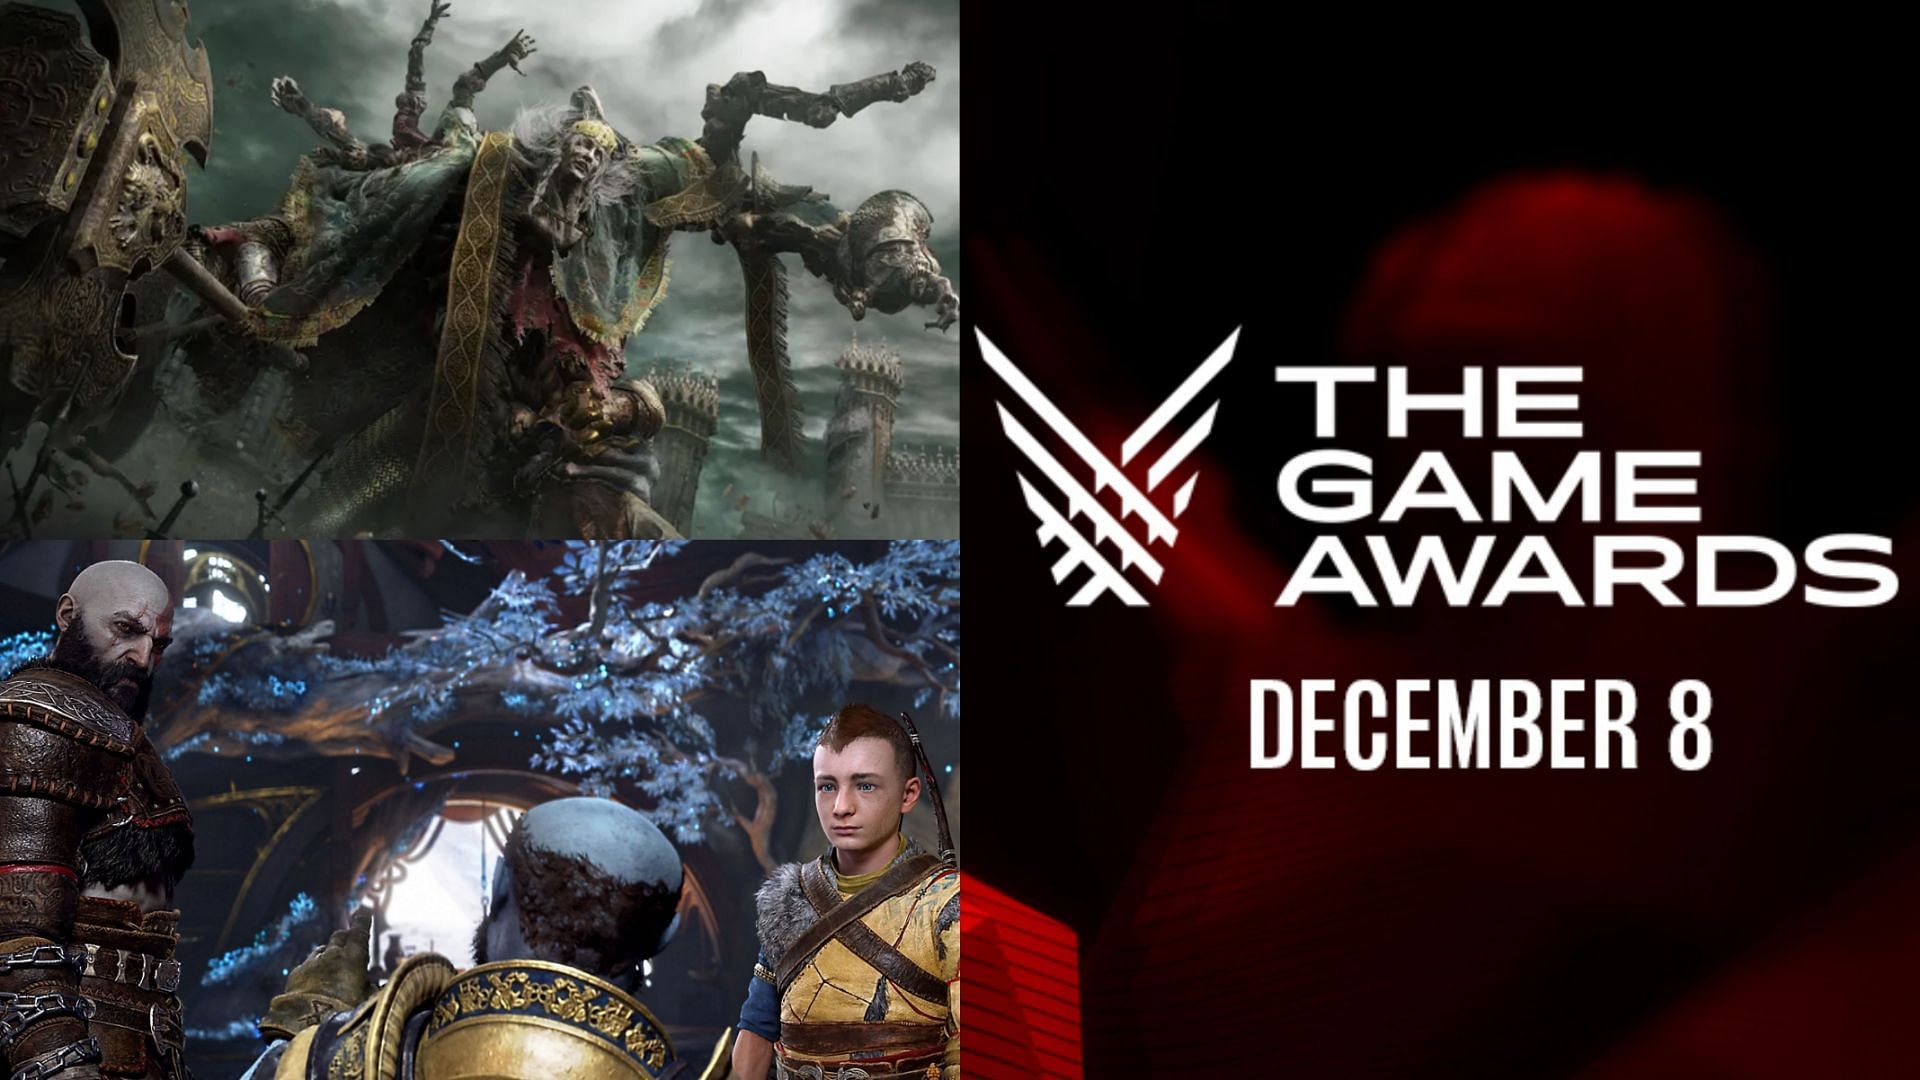 The Game Awards 2022 is set to take place on December 8 (Image via Bandai Namco, PlayStation, The Game Awards)